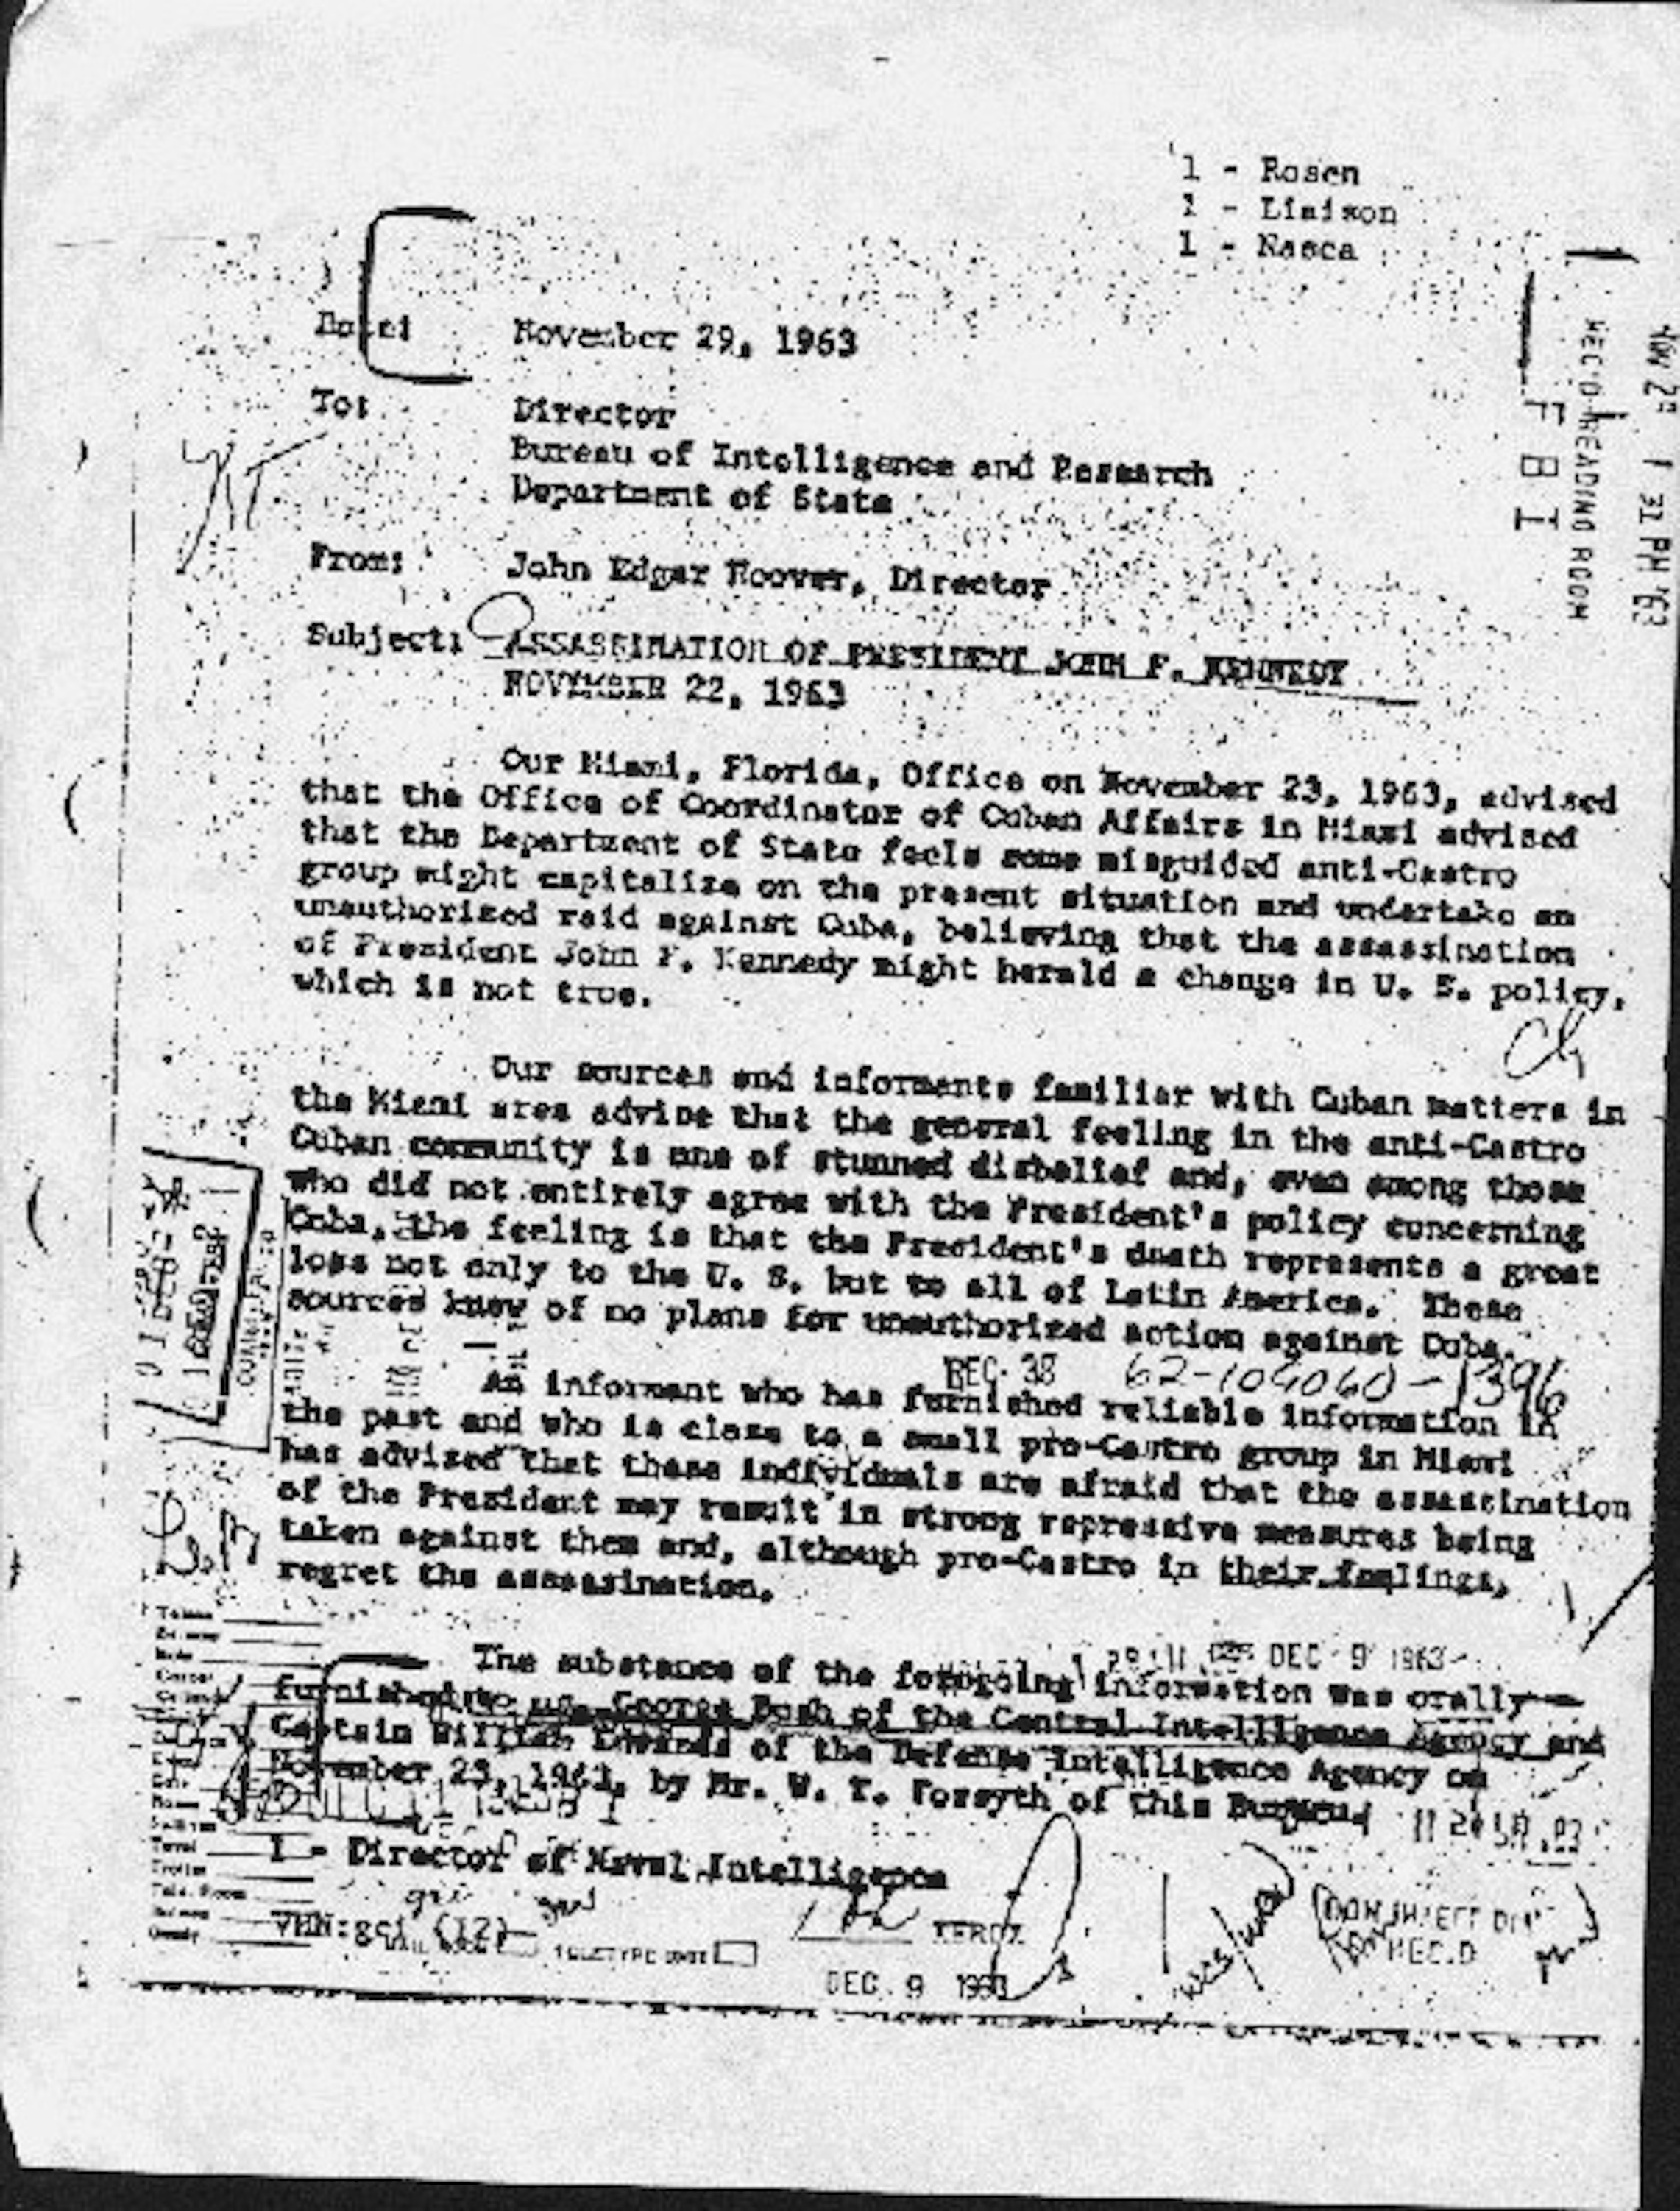 FBI director J. Edgar Hoover wrote this memo 5 days after the assassination, naming George Bush as a CIA officer